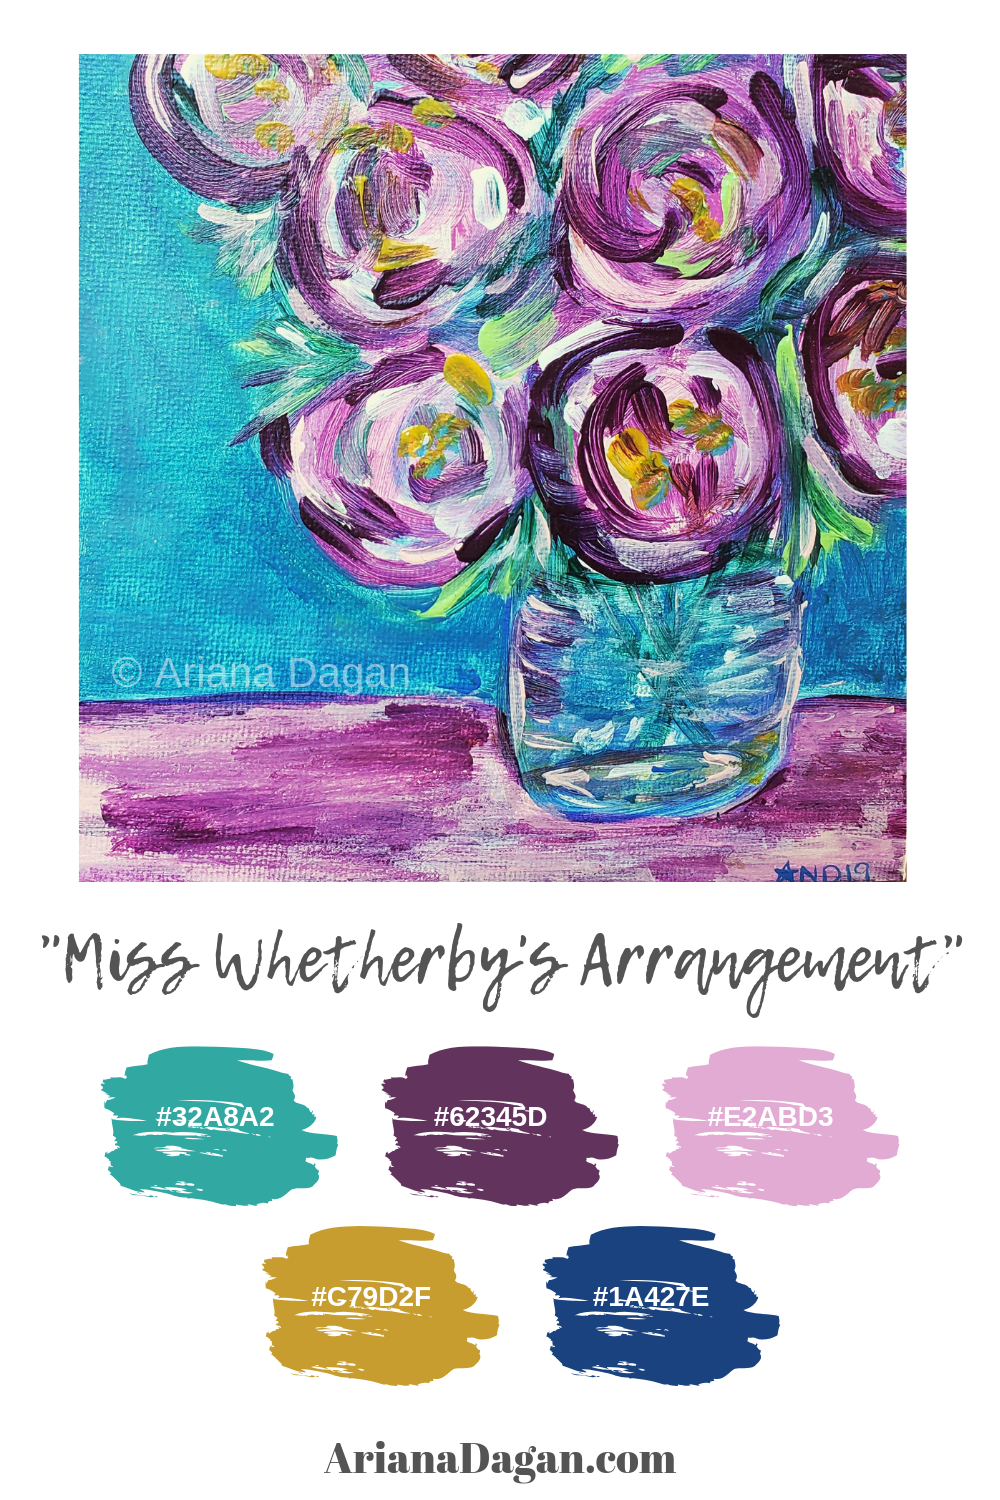 Miss Whetherby's Arrangement Color Palette by Ariana Dagan